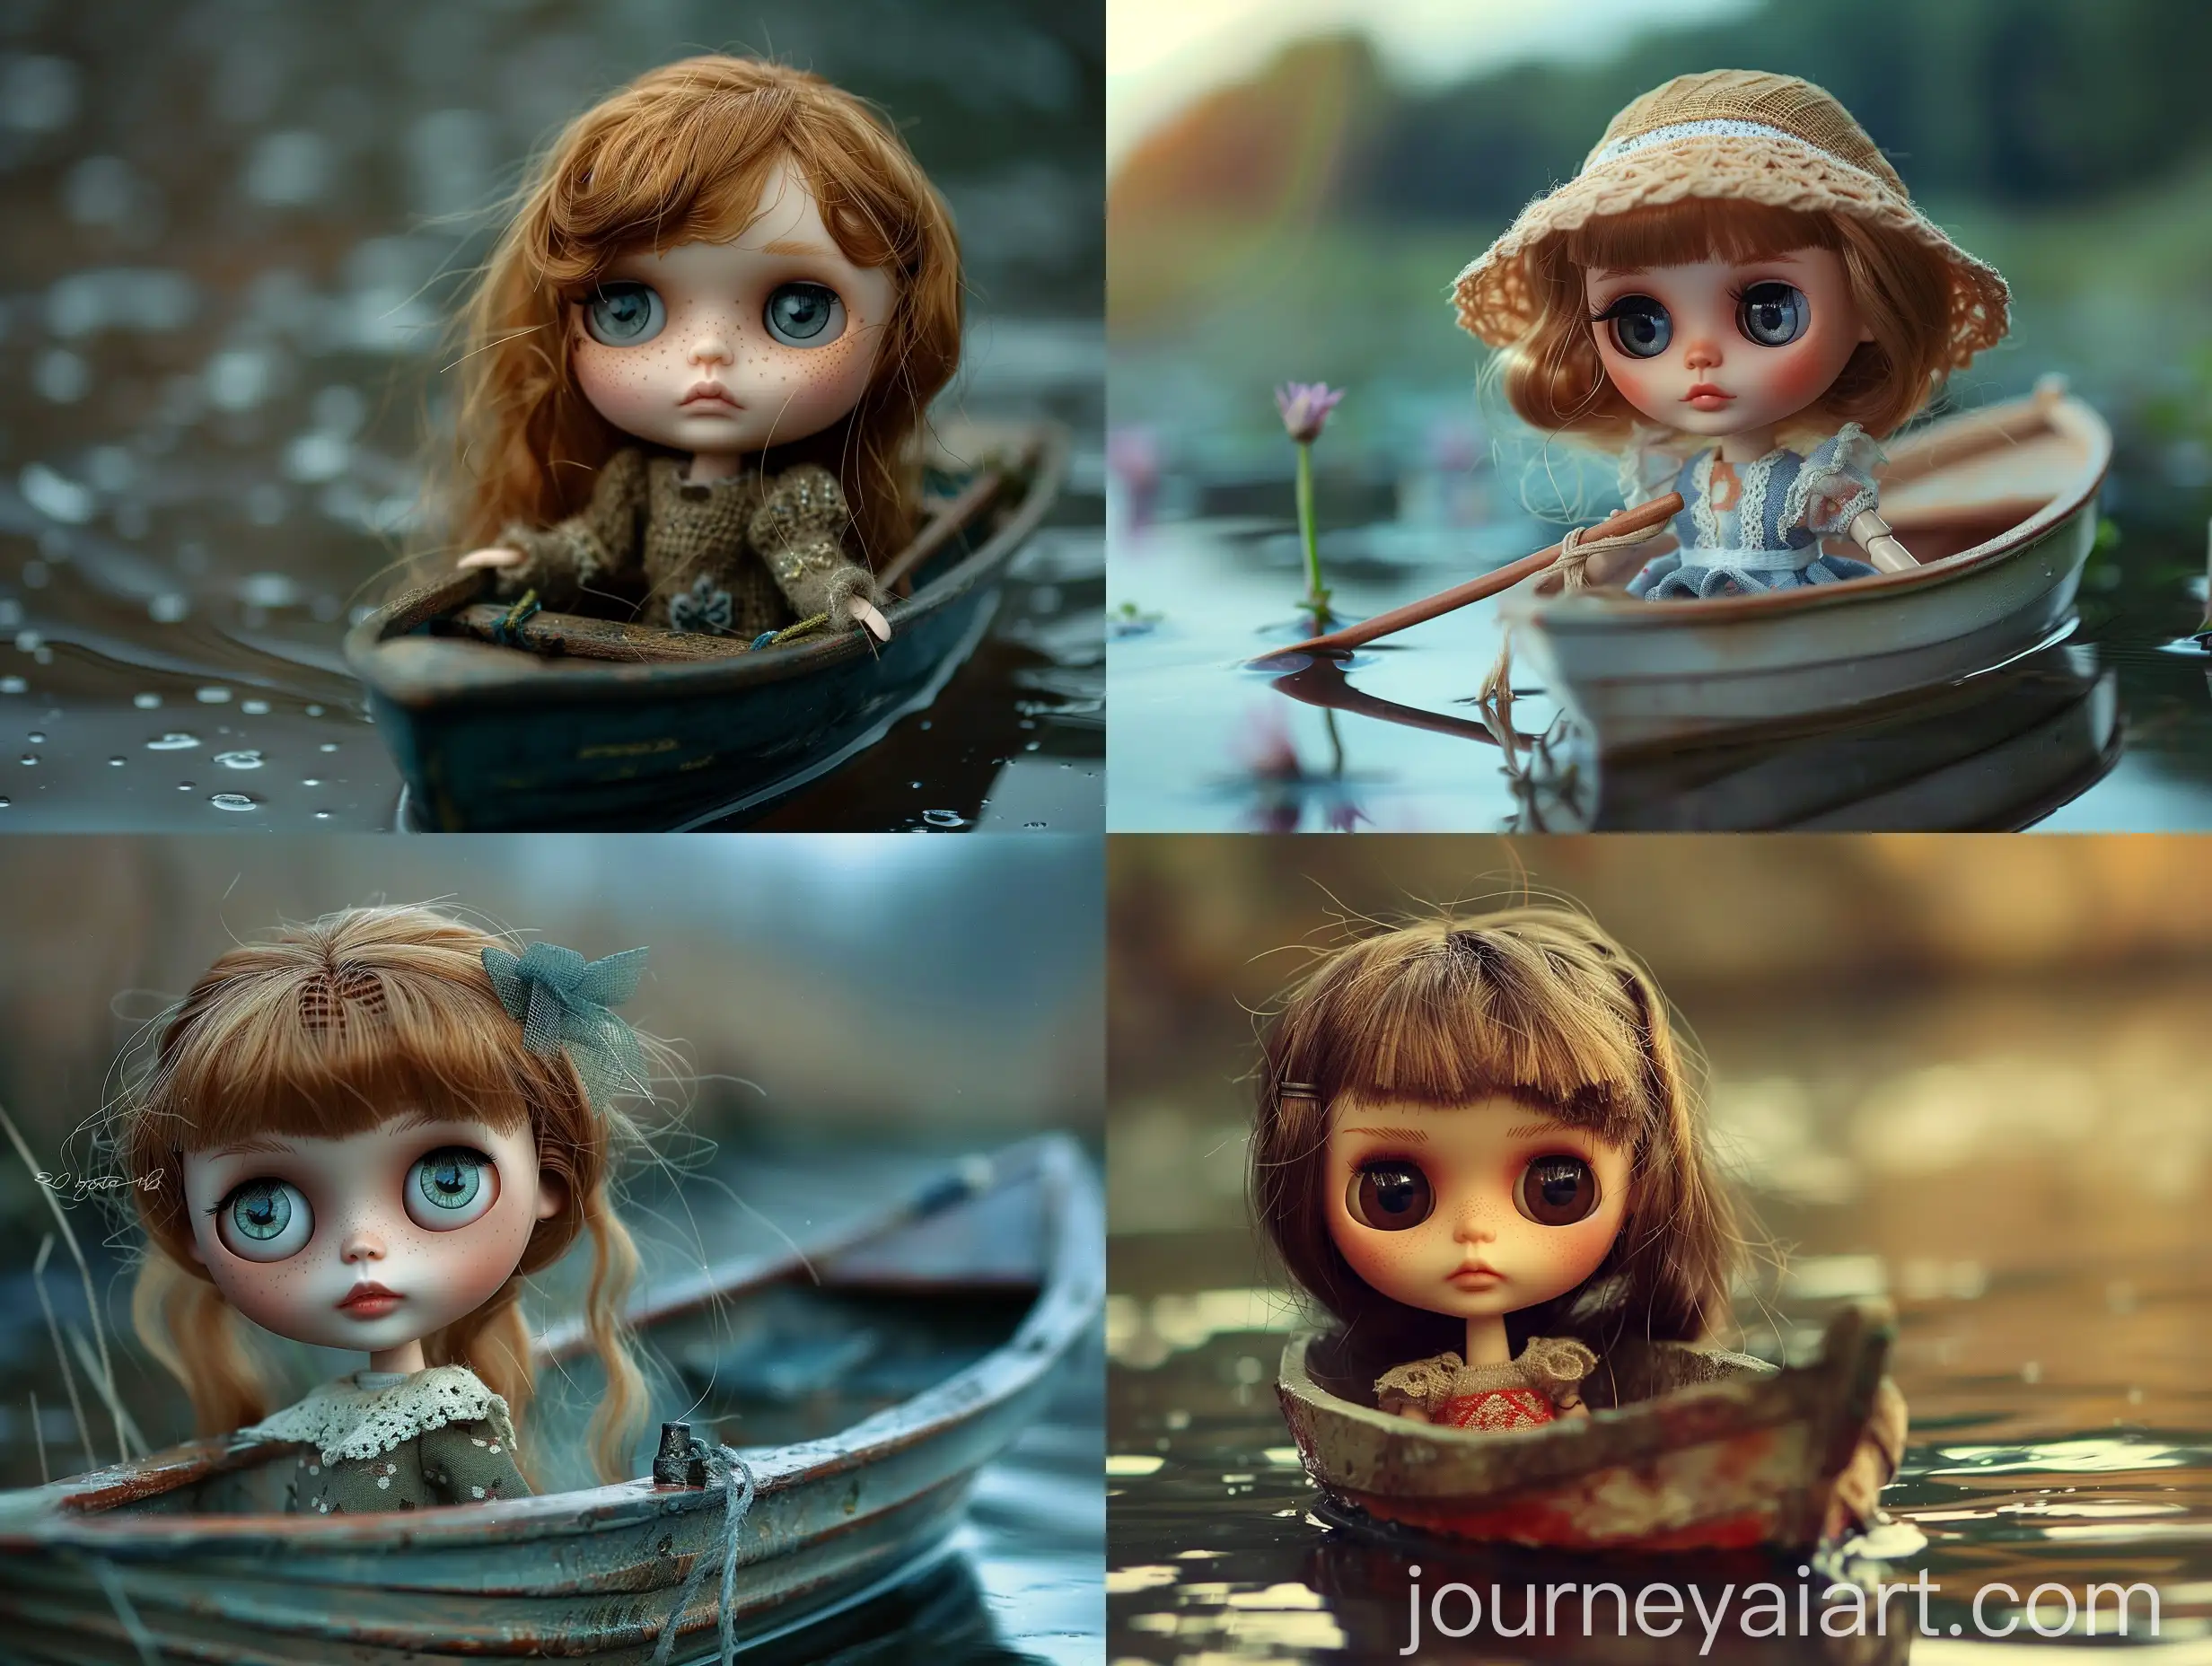 Fashionable-Blythe-Doll-Sailing-in-a-Boat-Anime-Style-Art